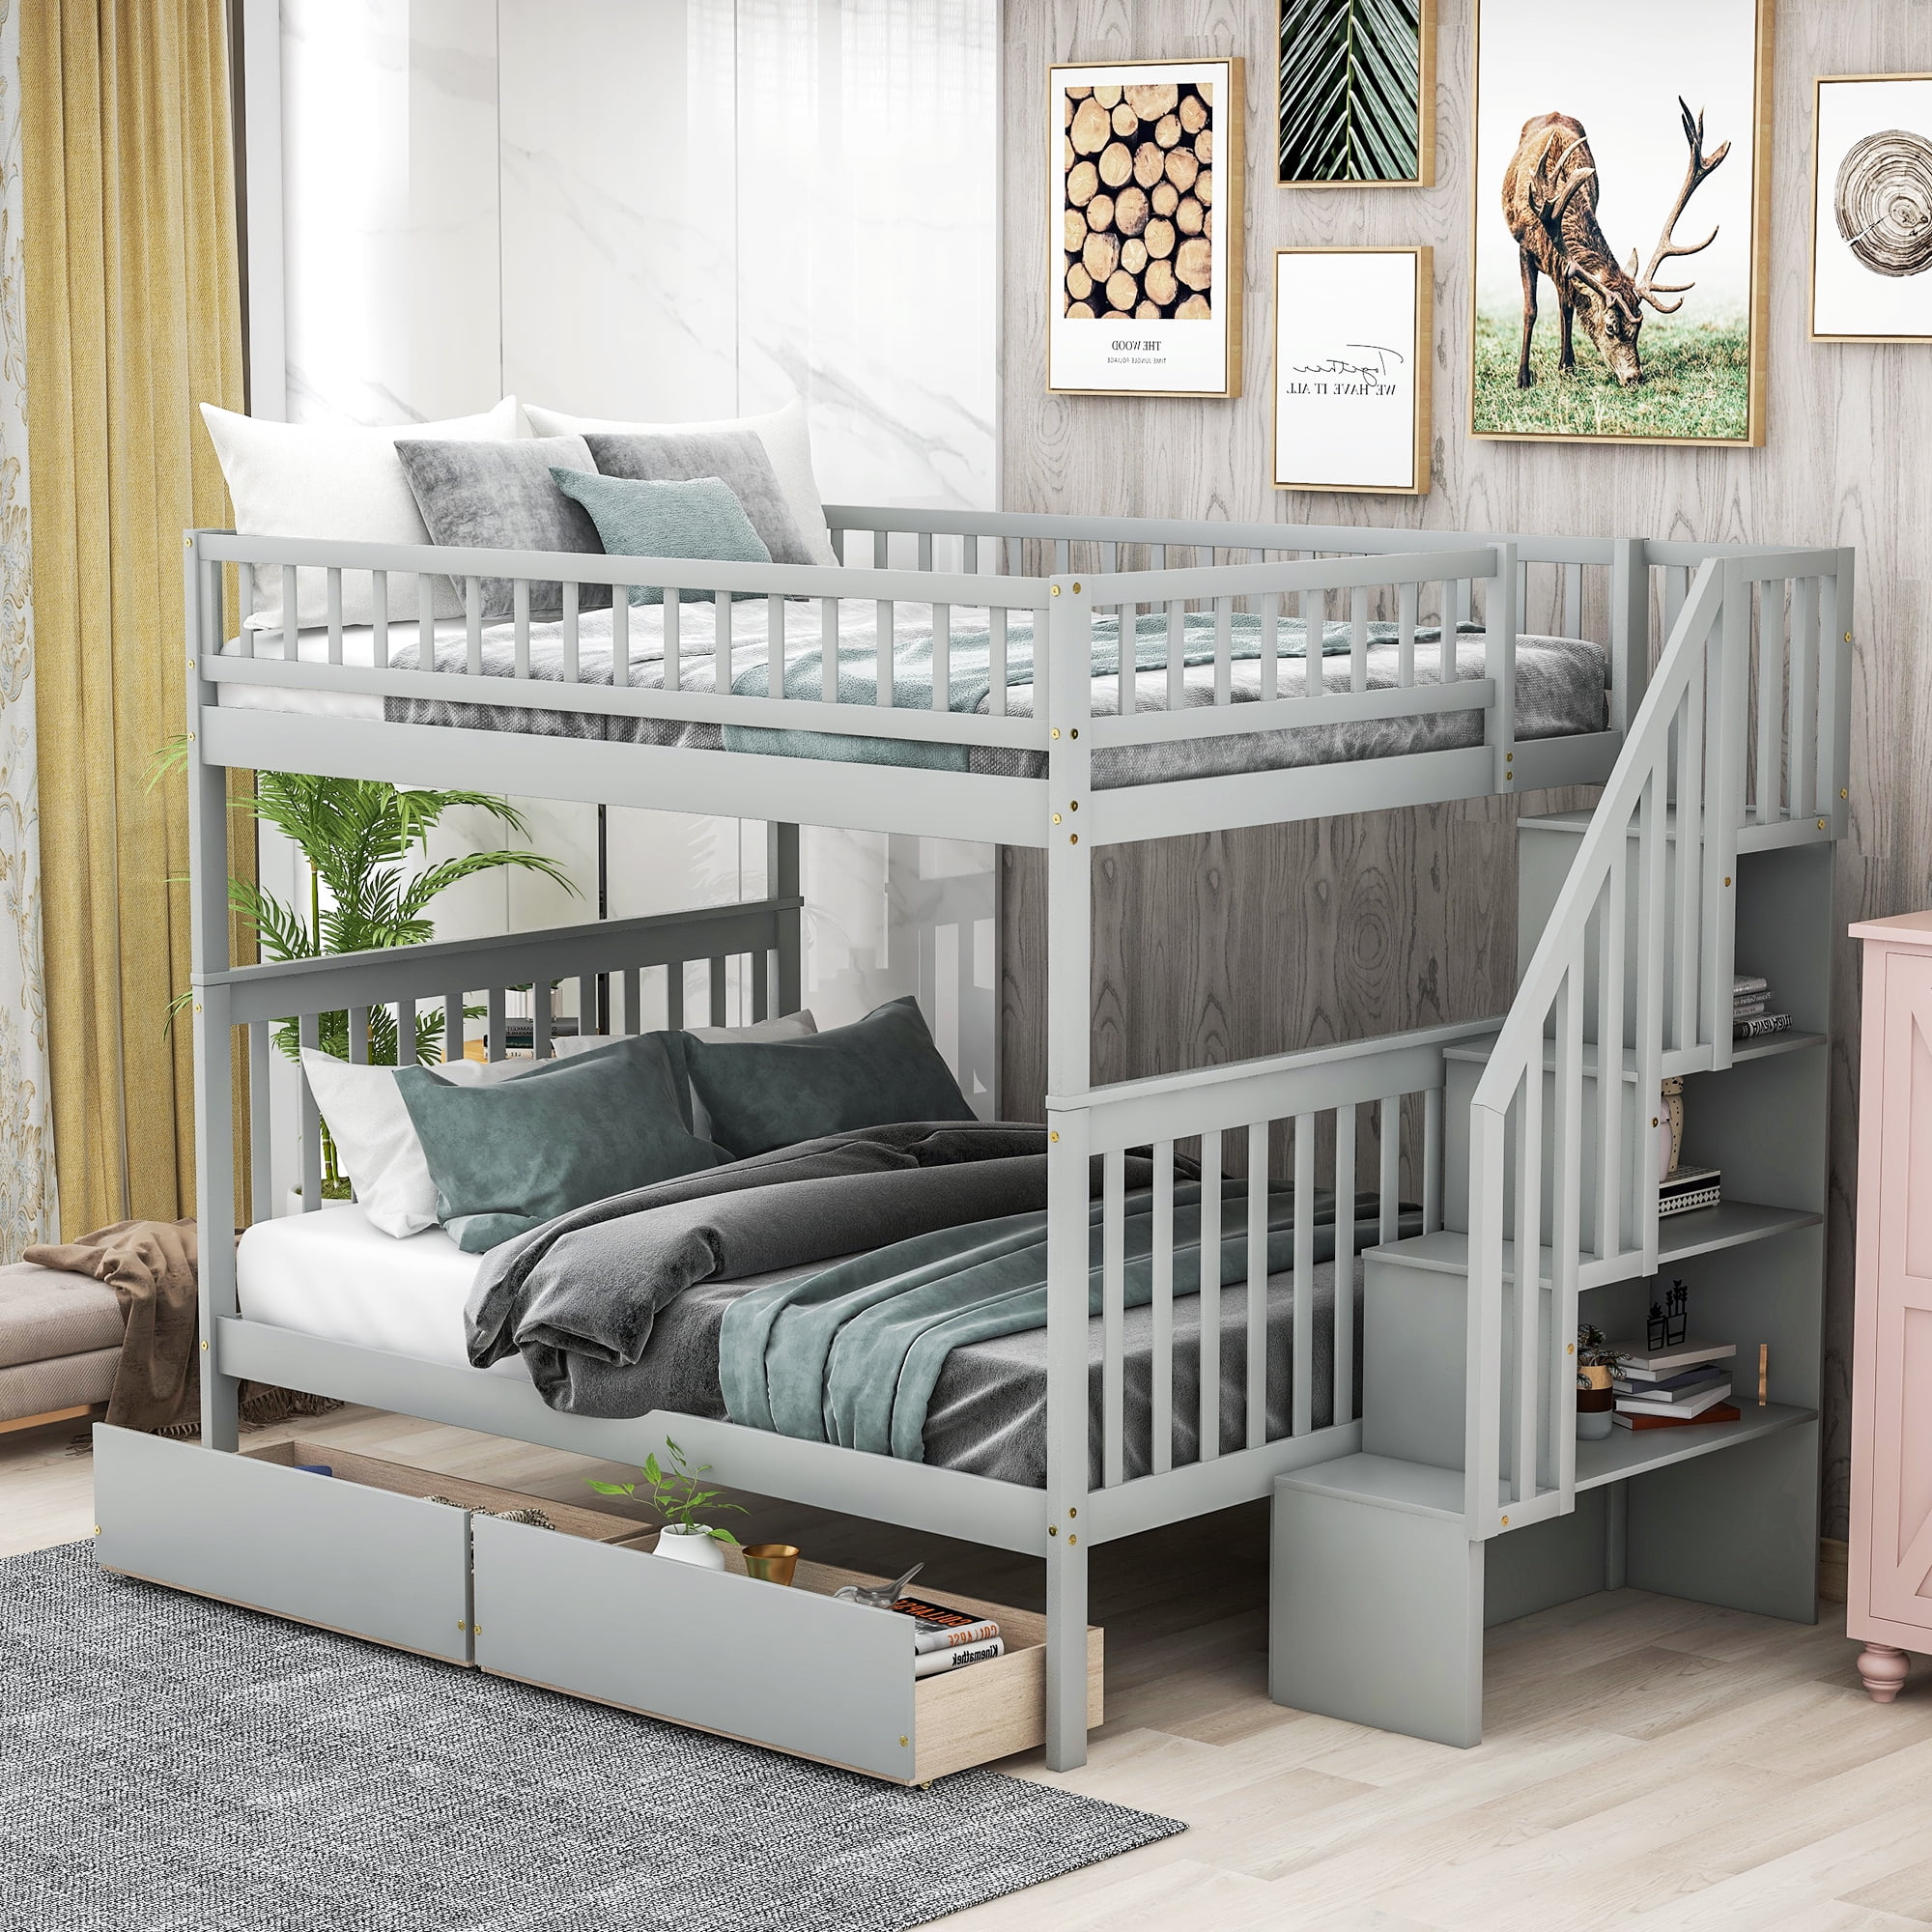 Euroco Full Over Bunk Bed With, Bunk Bed With Storage Shelves